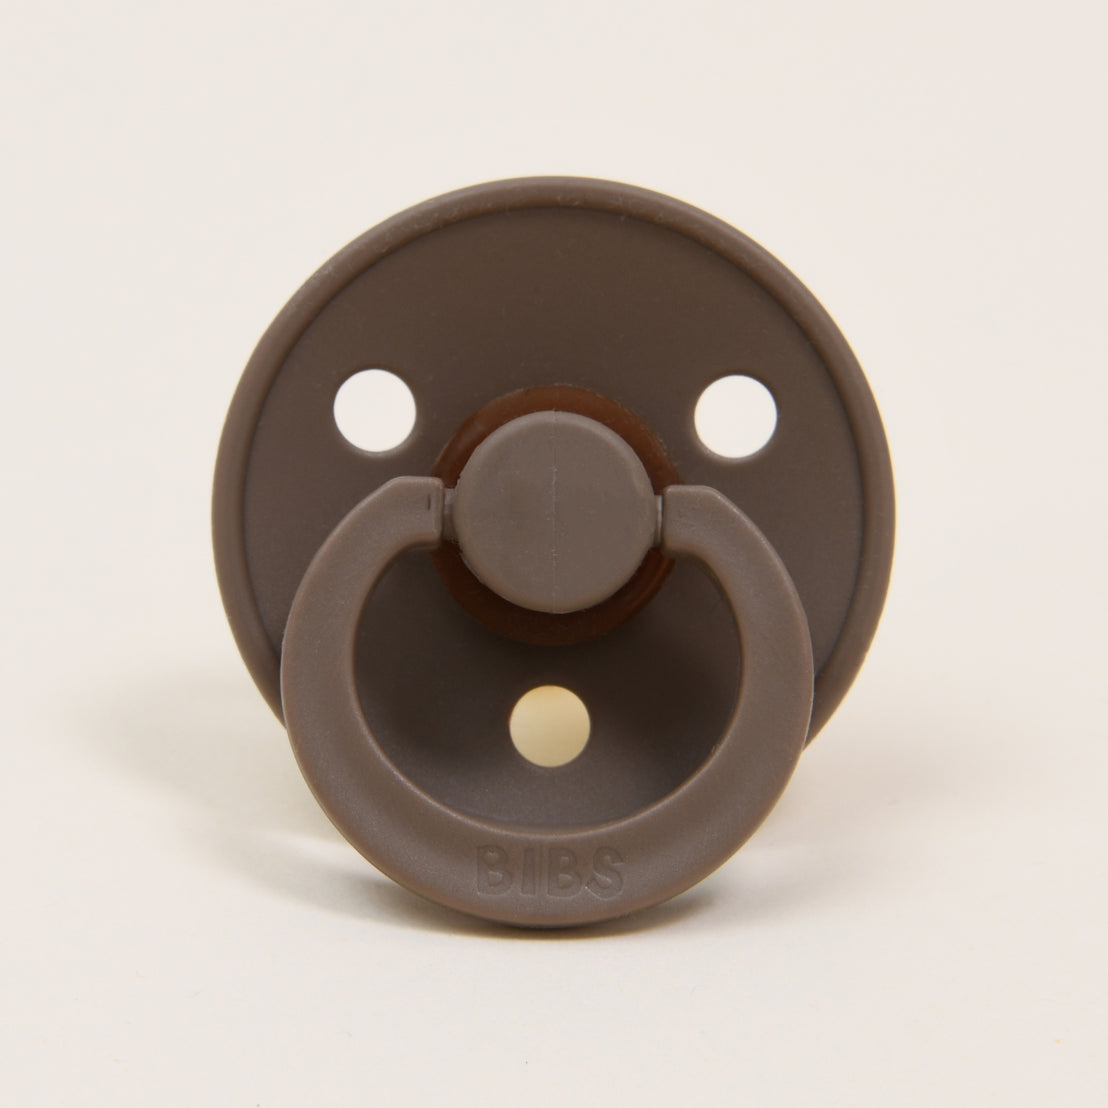 A round, brown upscale Austin Pacifier in Dark Oak with the word "bibs" on it, featuring a handle and three air holes on a neutral background.